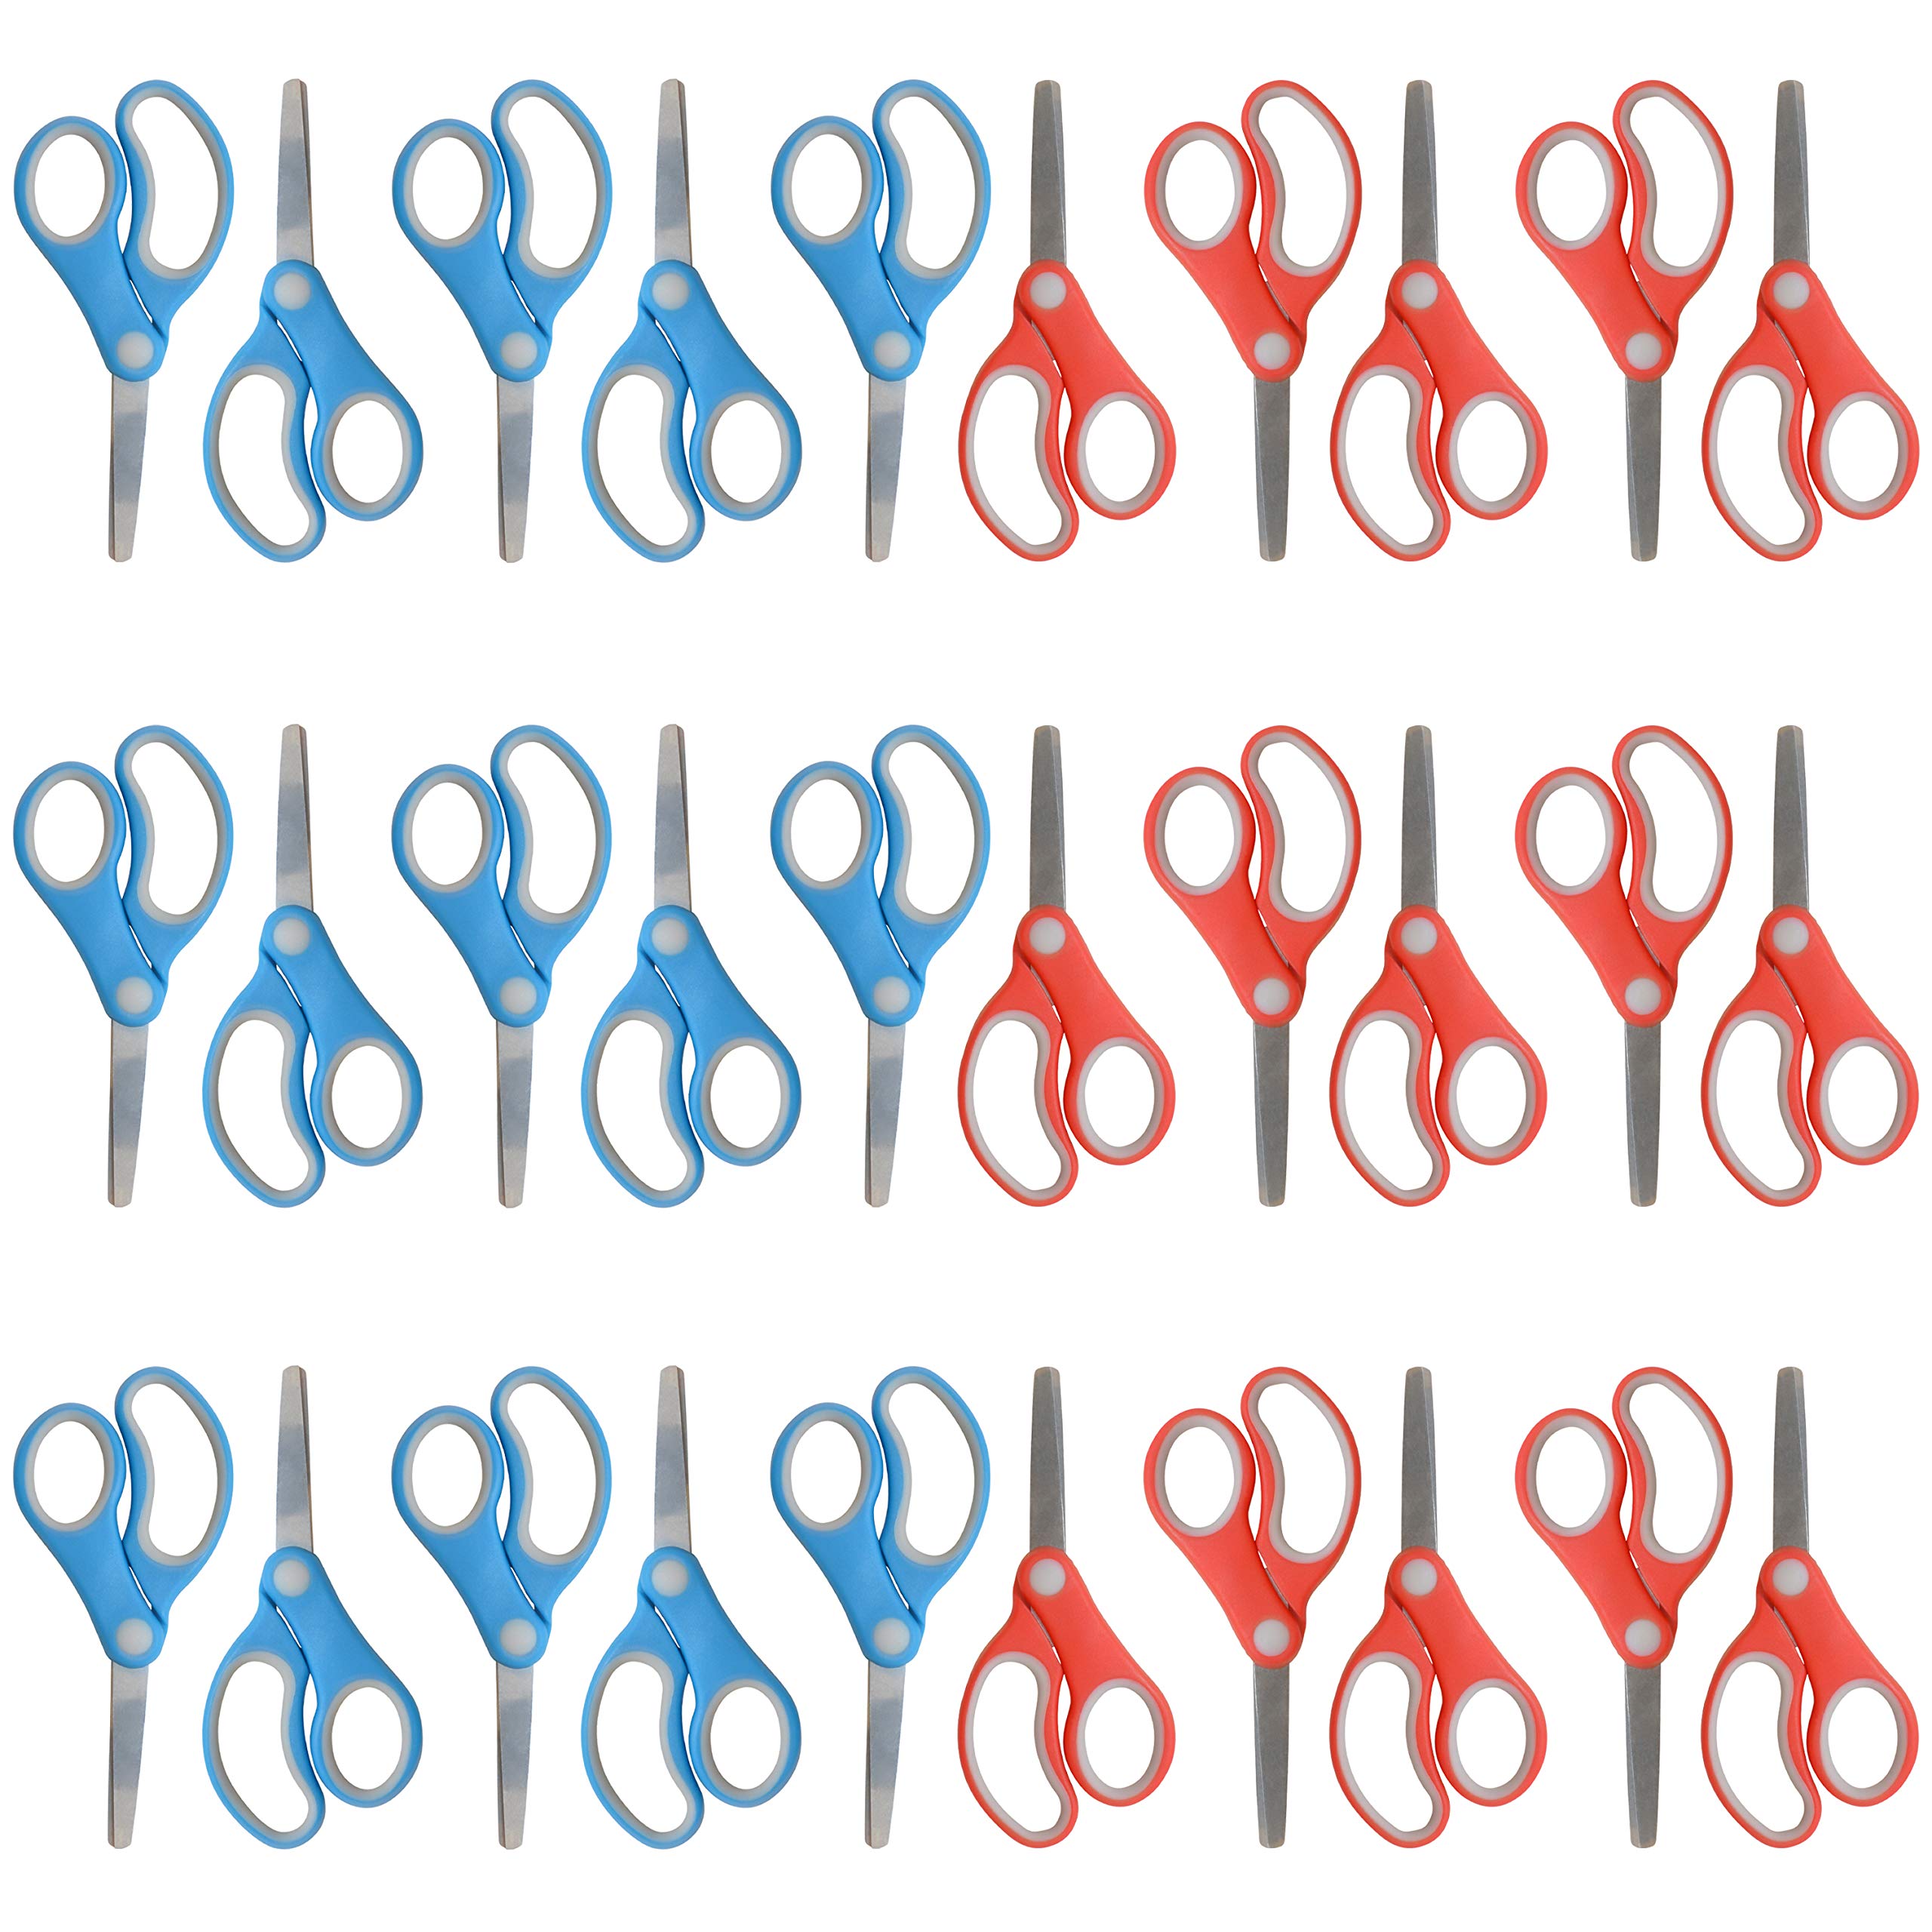 Westcott 55845 Right- and Left-Handed Scissors, Kids Scissors, Ages 4-8,  5-Inch Blunt Tip, 30 Pack